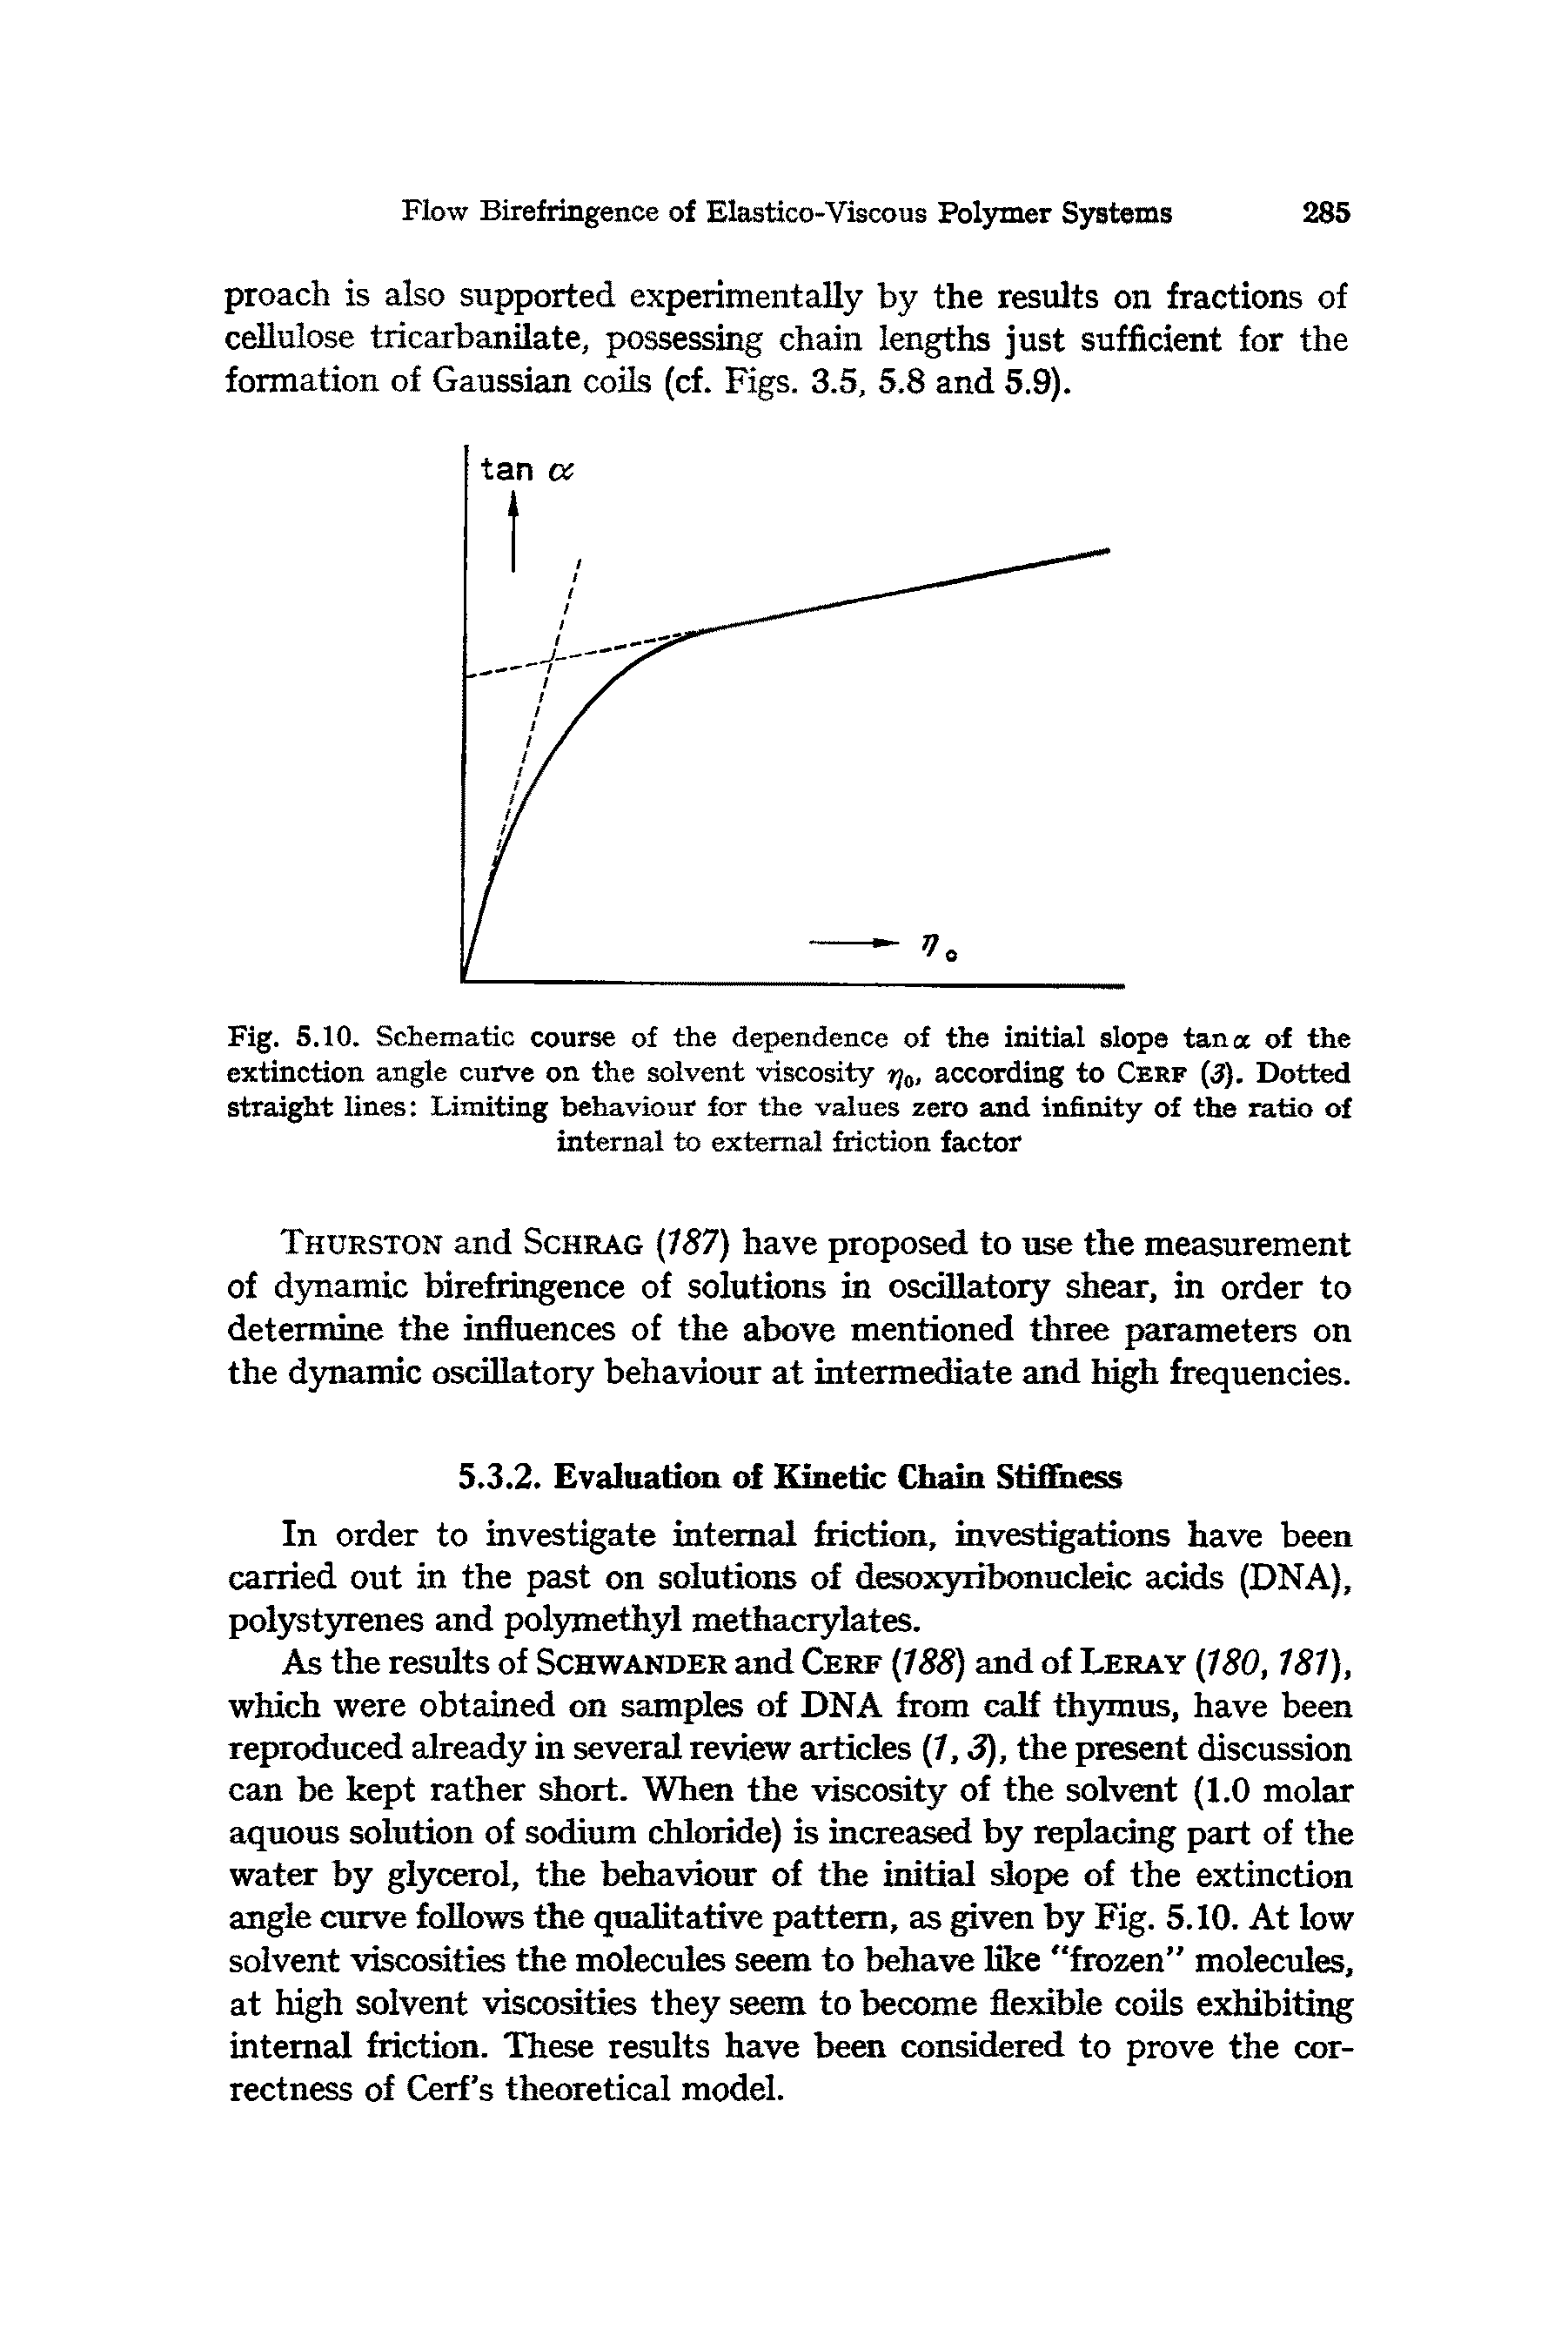 Fig. 5.10. Schematic course of the dependence of the initial slope tana of the extinction angle curve on the solvent viscosity jj0, according to Cerf (3). Dotted straight lines Limiting behaviour for the values zero and infinity of the ratio of internal to external friction factor...